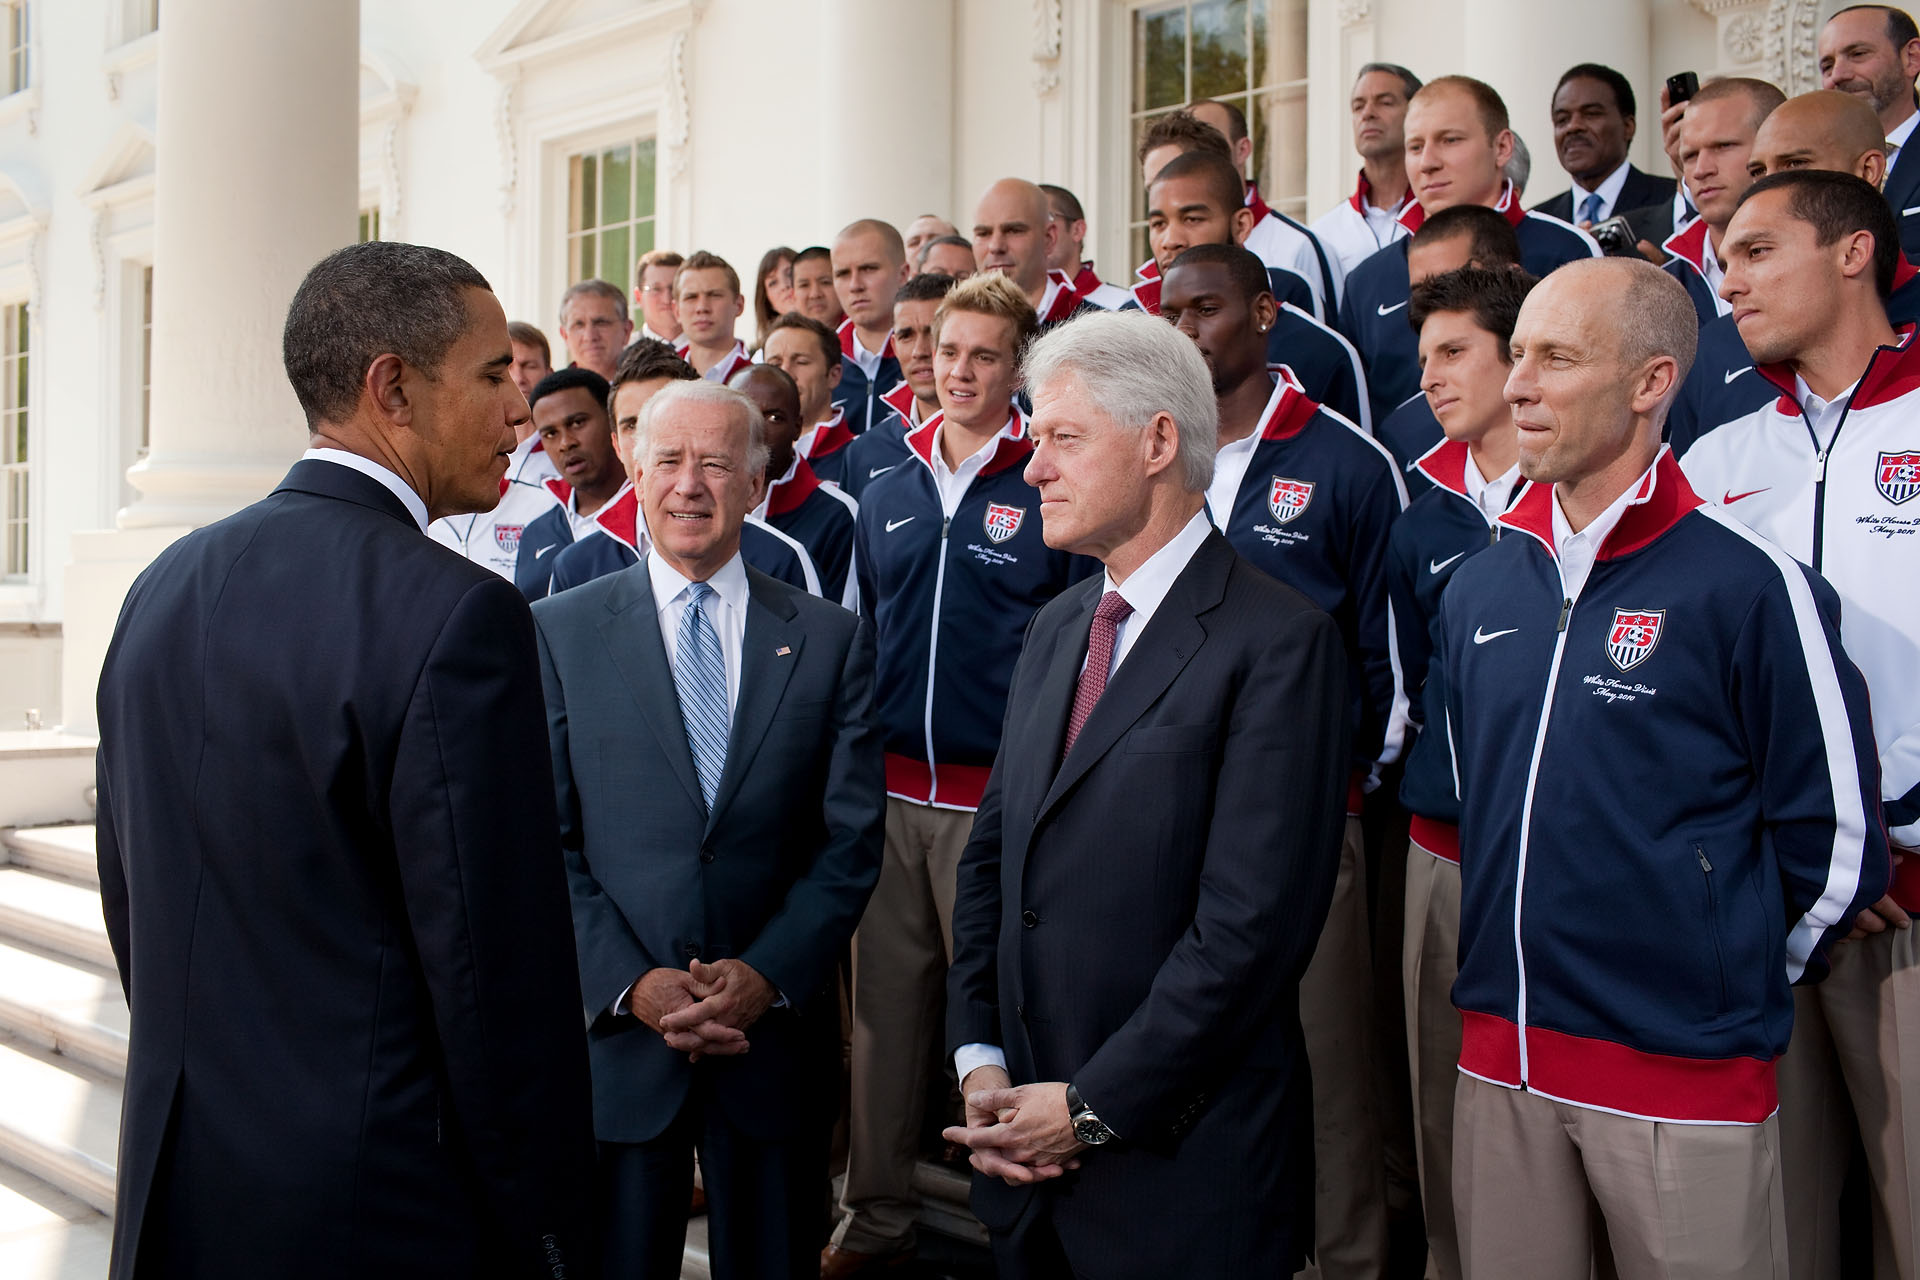 President Obama, President Clinton, Vice President Biden and the US World Cup Team